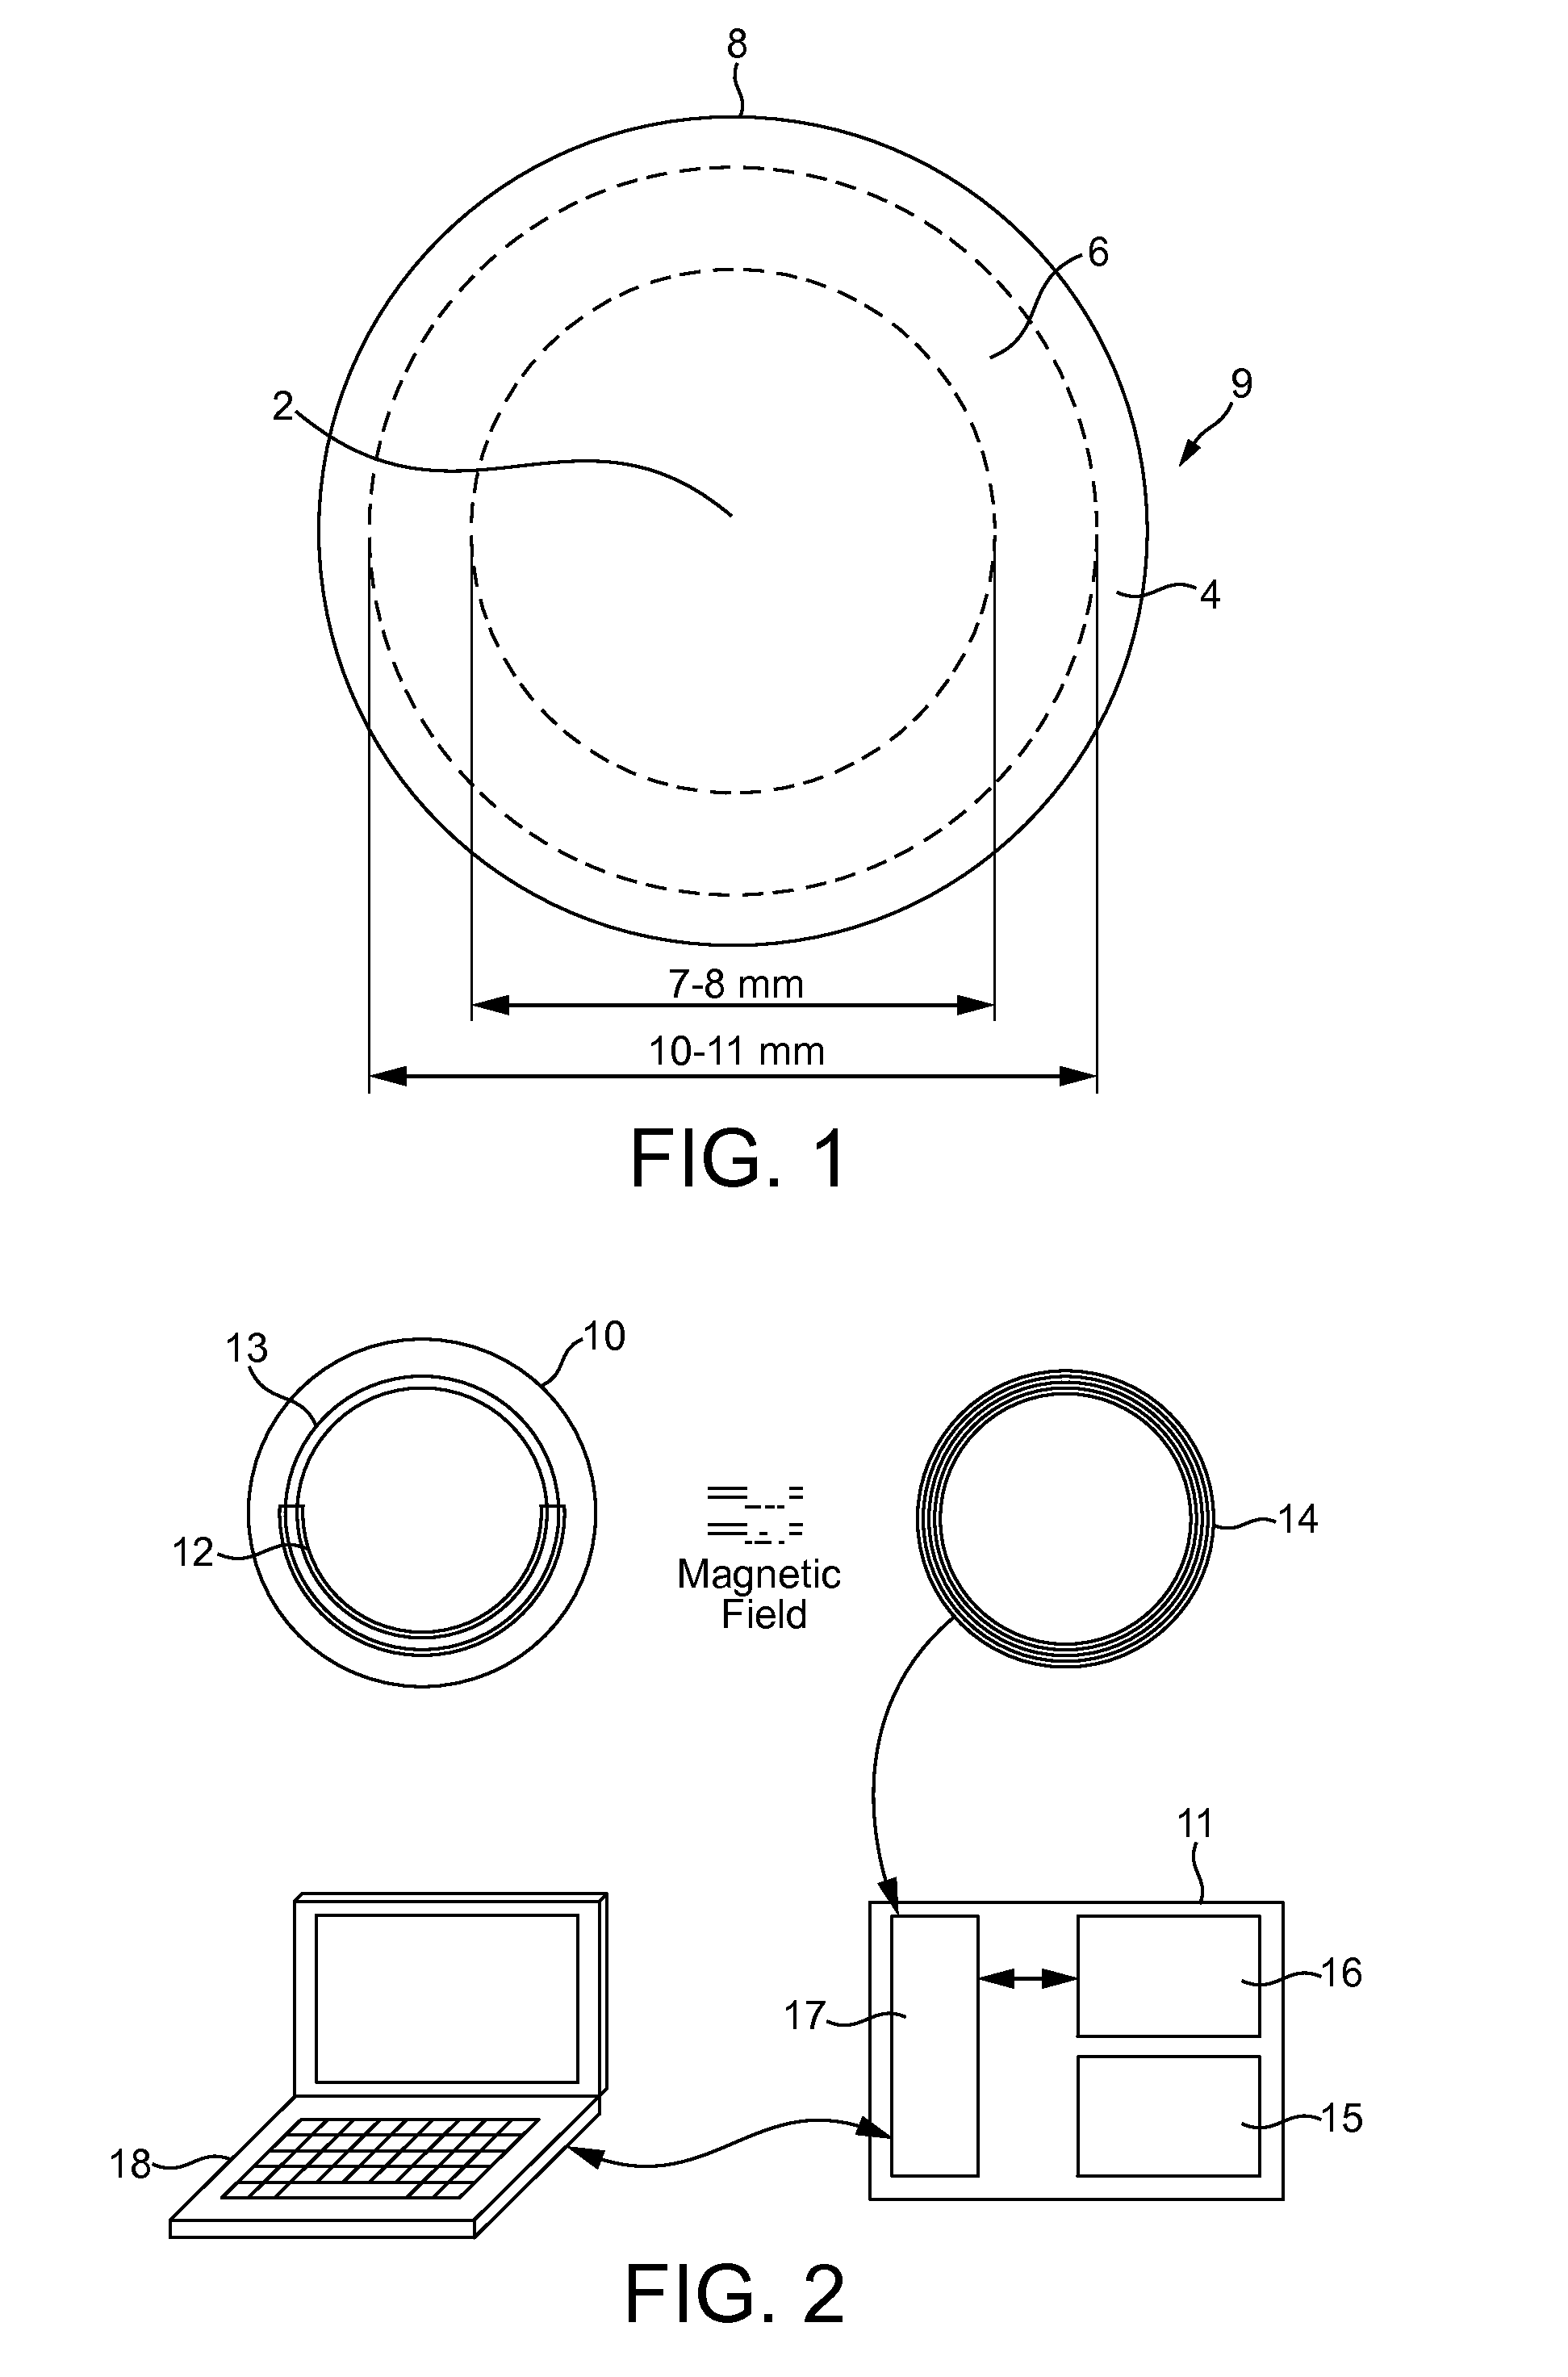 Device for monitoring intraocular pressure